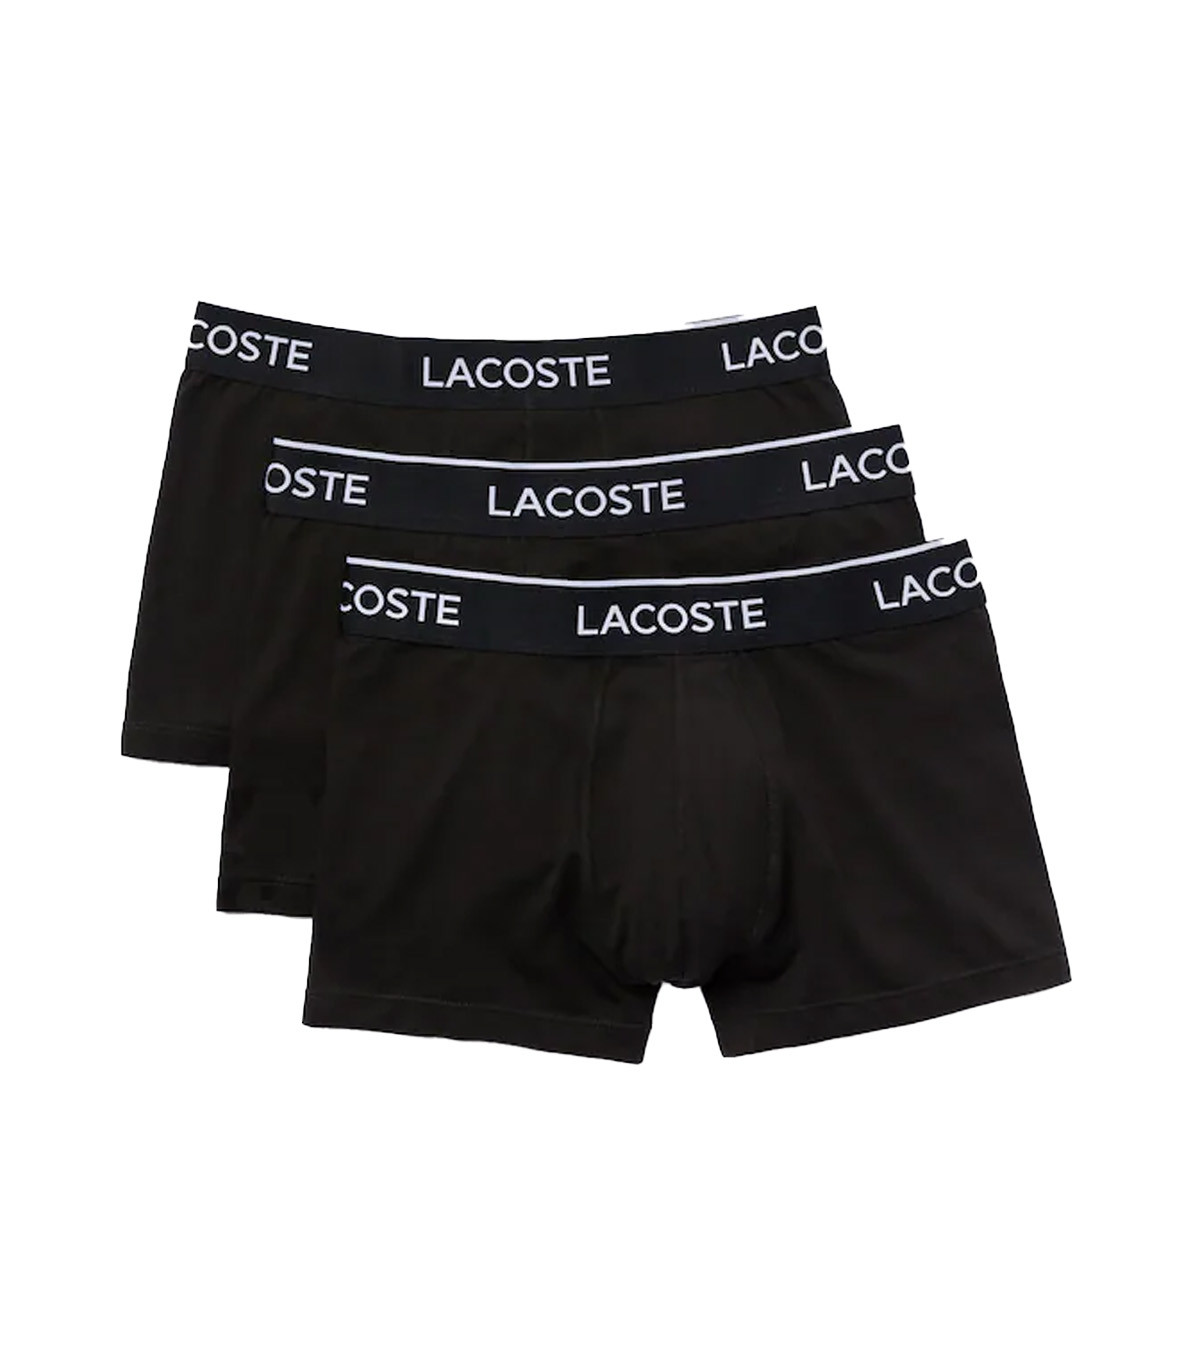 Lacoste - Bóxers Pack x3 Casual - Negro